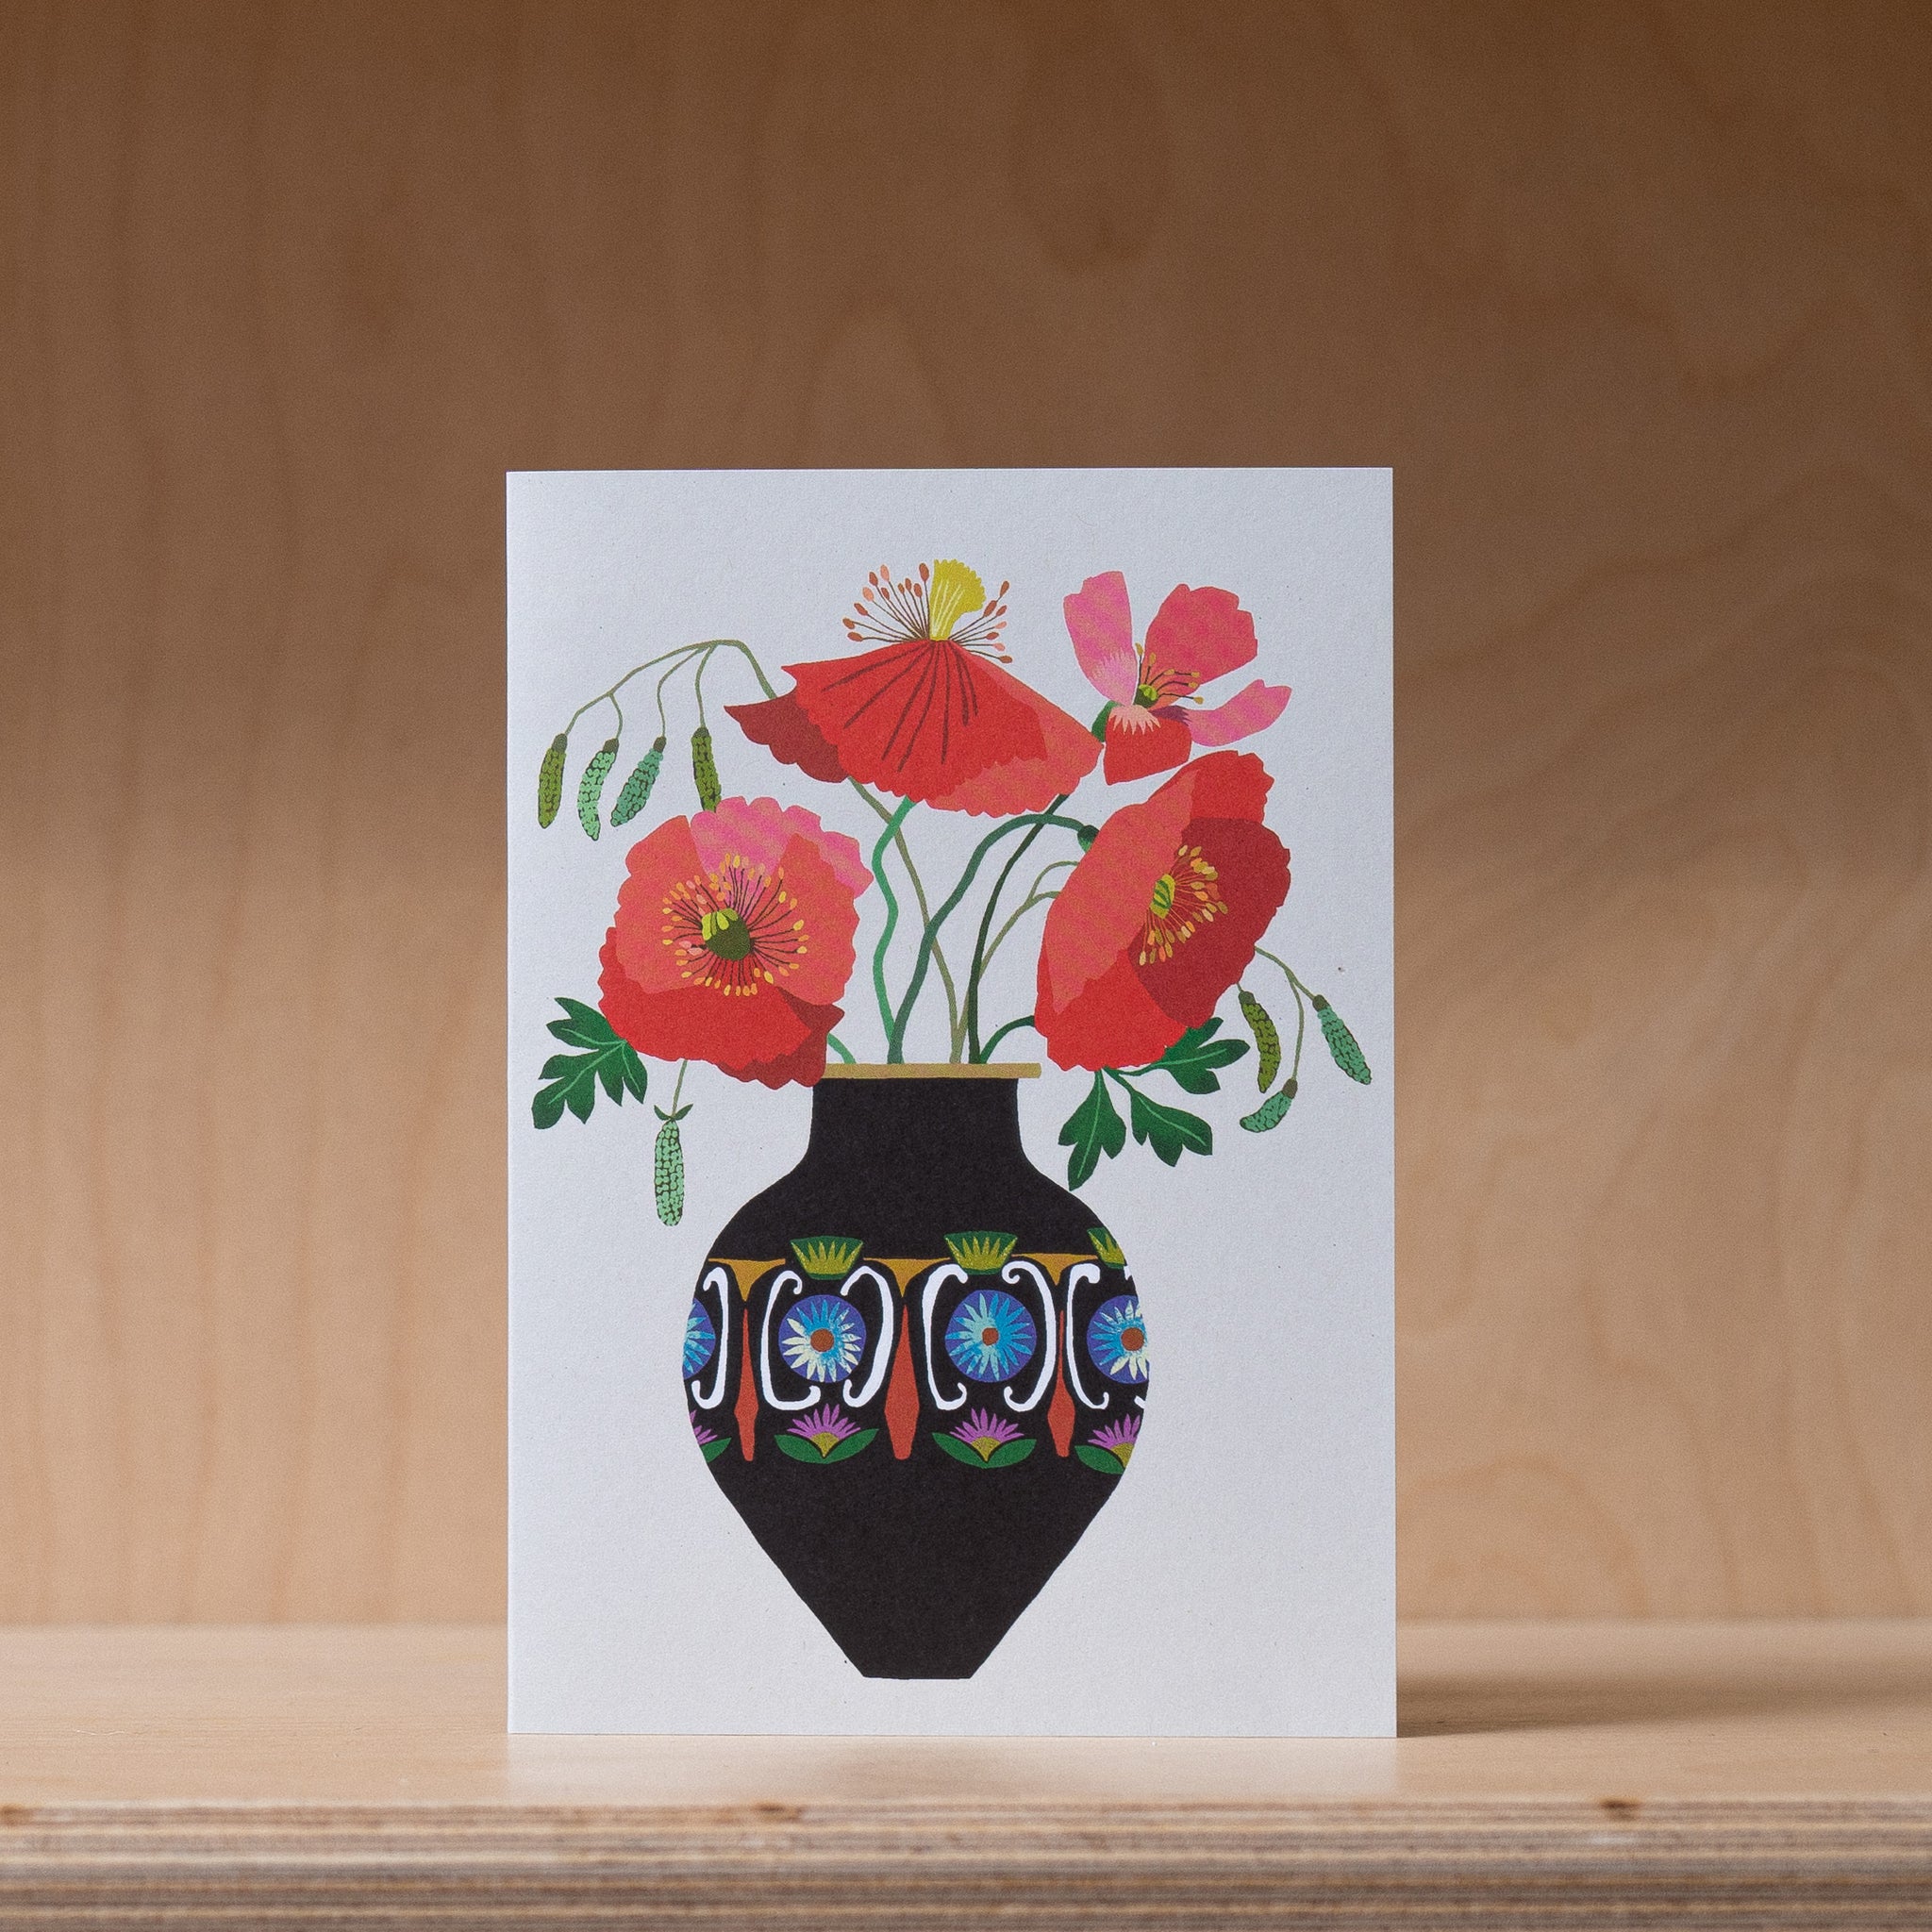 Brie Harrison Poppies in a Vase - Greetings Card